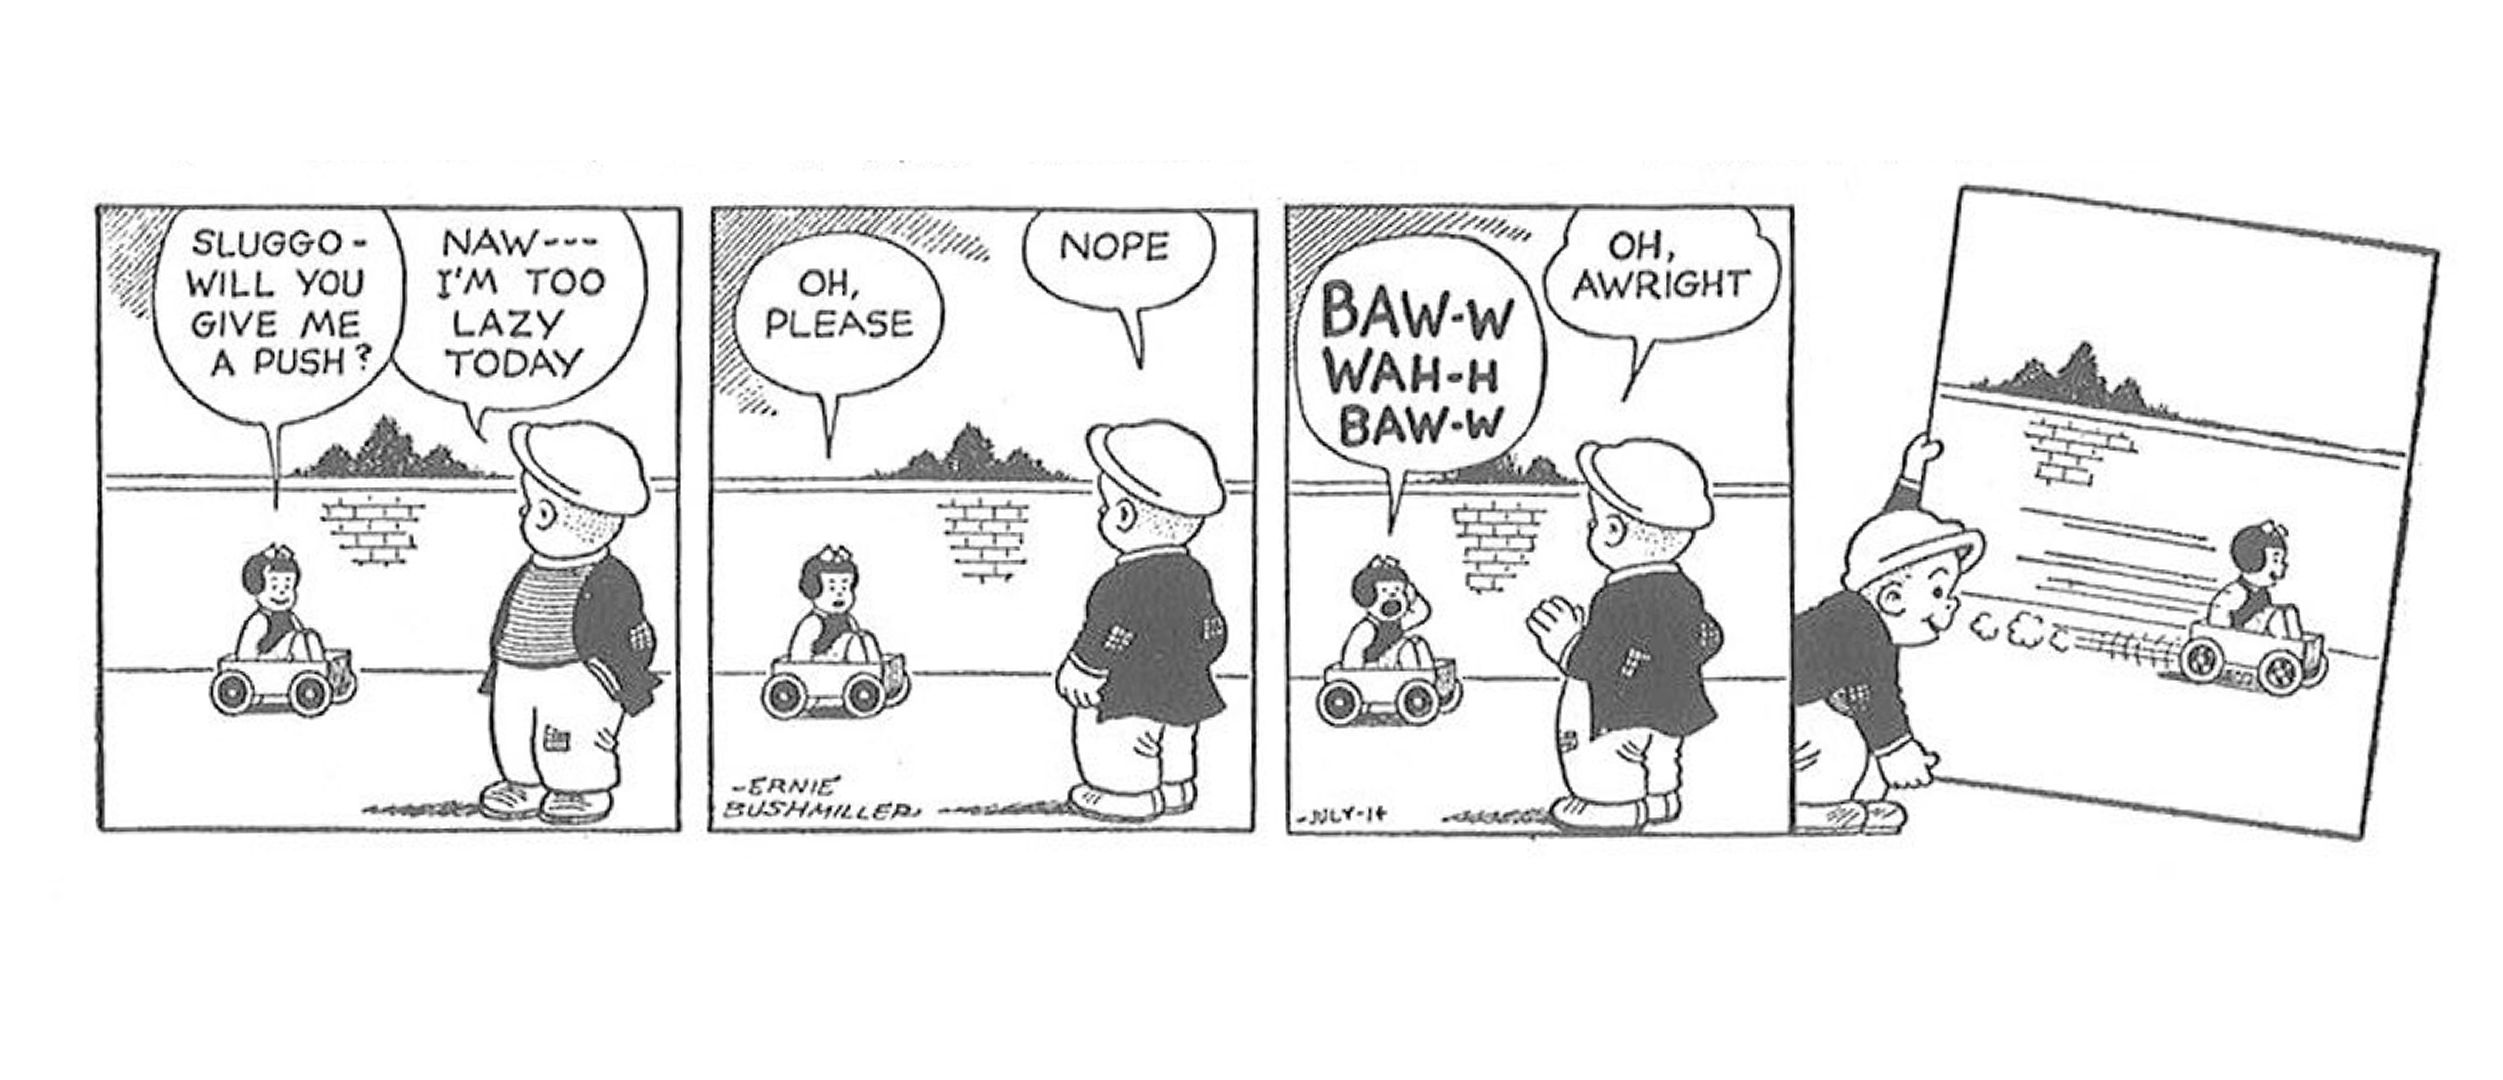 Nancy cries in her wagon until Sluggo gives her a push - by tilting the comic panel she's in downhill.